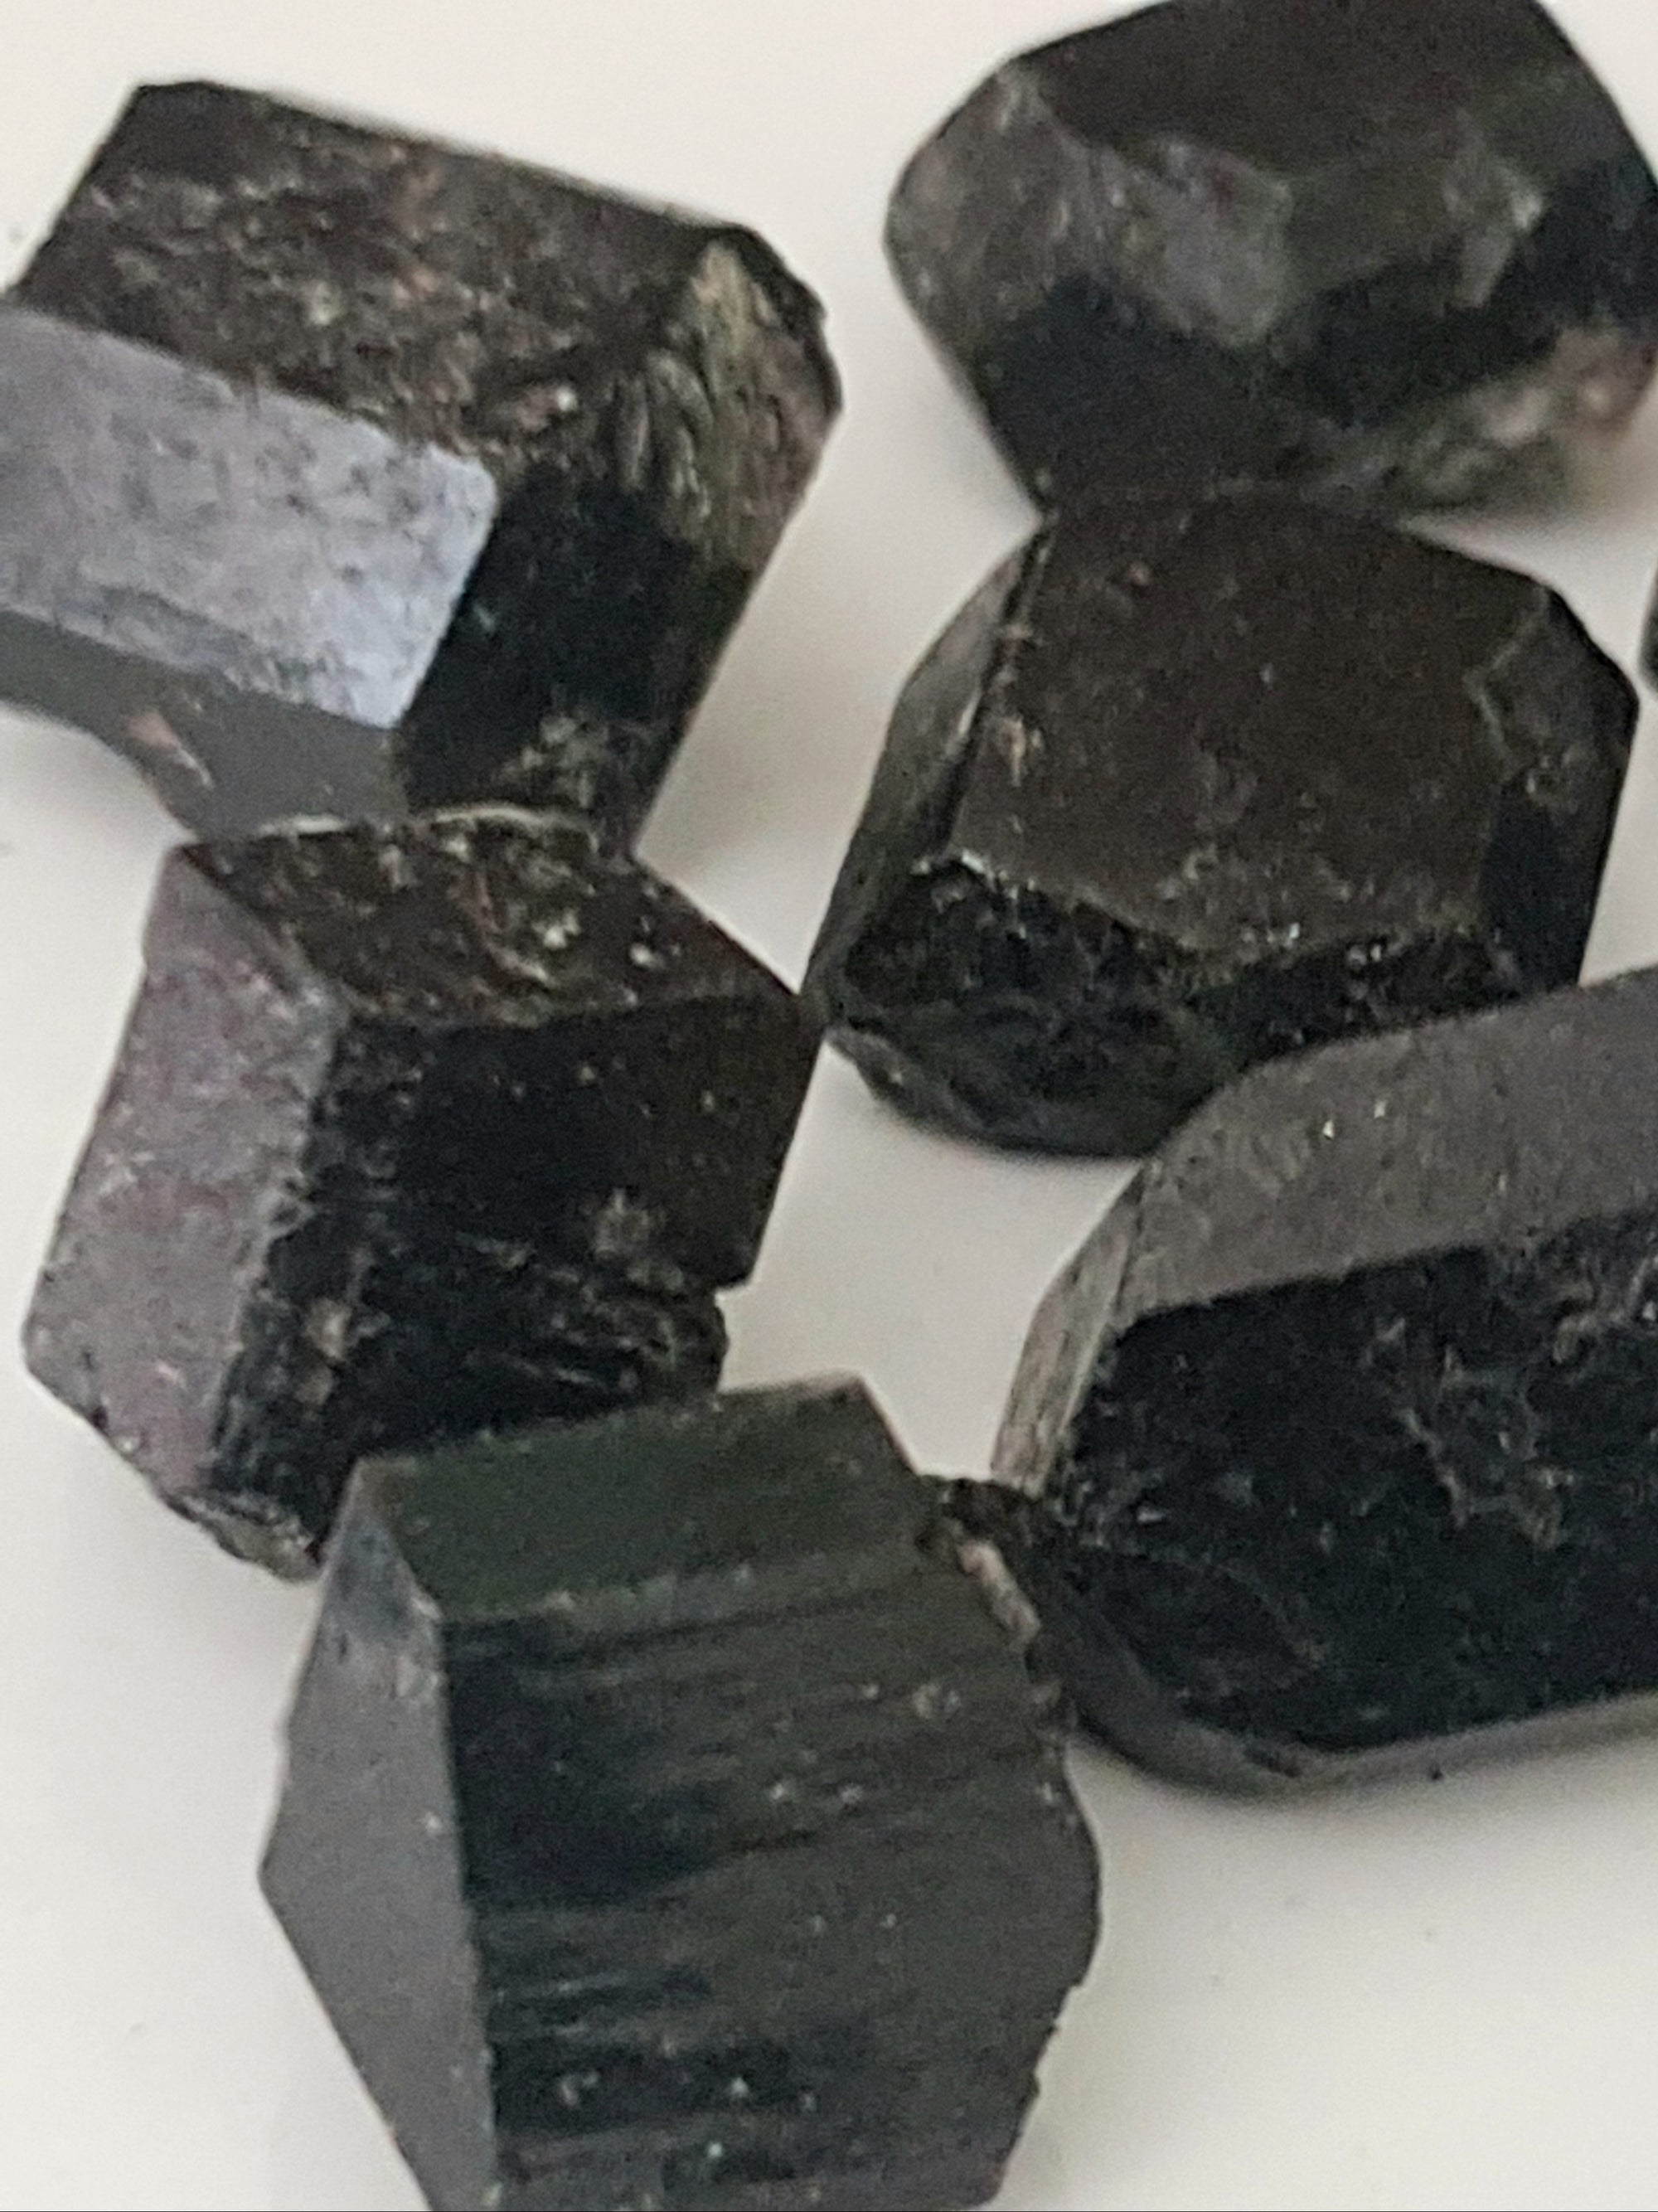 six crystals of black tourmaline. They are prismatic and well formed.